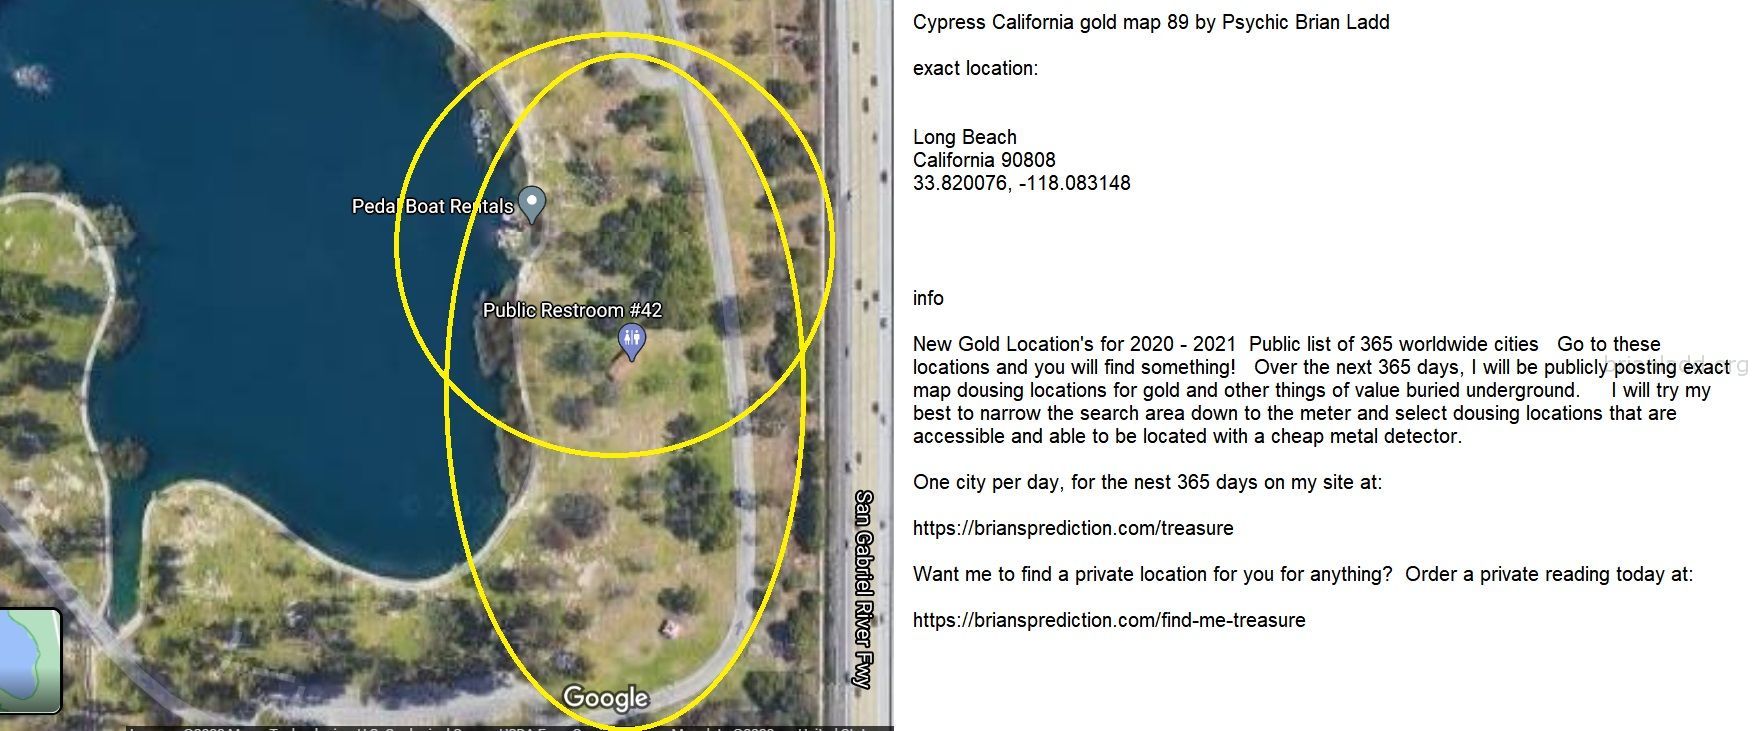 Cypress California Gold Map 89 By Psychic Brian Ladd - Cypress California Gold Map 89 By Psychic Brian Ladd  Exact Locat...
Cypress California Gold Map 89 By Psychic Brian Ladd  Exact Location:  Long Beach  California 90808  33.820076, -118.083148  Info  New Gold Location'S For 2020 - 2021  Public List Of 365 Worldwide Cities  Go To These Locations And You Will Find Something!  Over The Next 365 Days, I Will Be Publicly Posting Exact Map Dousing Locations For Gold And Other Things Of Value Buried Underground.  I Will Try My Best To Narrow The Search Area Down To The Meter And Select Dousing Locations That Are Accessible And Able To Be Located With A Cheap Metal Detector.  One City Per Day, For The Nest 365 Days On My Site At:   https://briansprediction.com/Treasure  Want Me To Find A Private Location For You For Anything?  Order A Private Reading Today At:   https://briansprediction.com/Find-Me-Treasure
